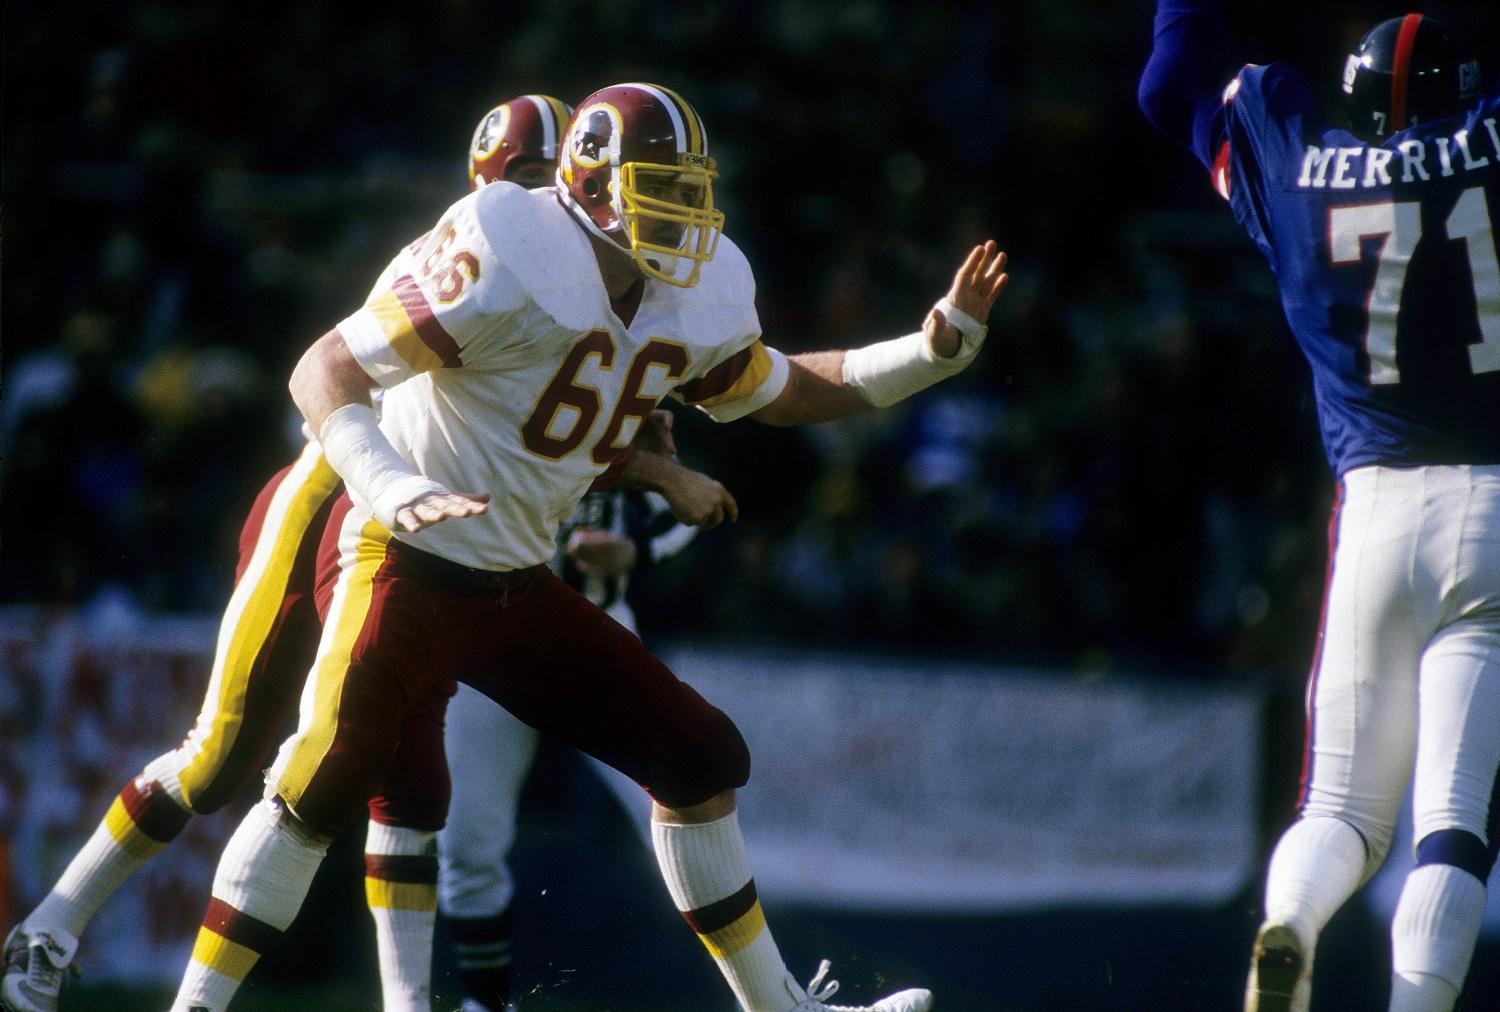 Tackle Joe Jacoby was one of the famous 'Hogs' protecting three Washington quarterbacks who took the franchise to Super Bowl titles under coach Joe Gibbs. | Focus on Sport/Getty Images